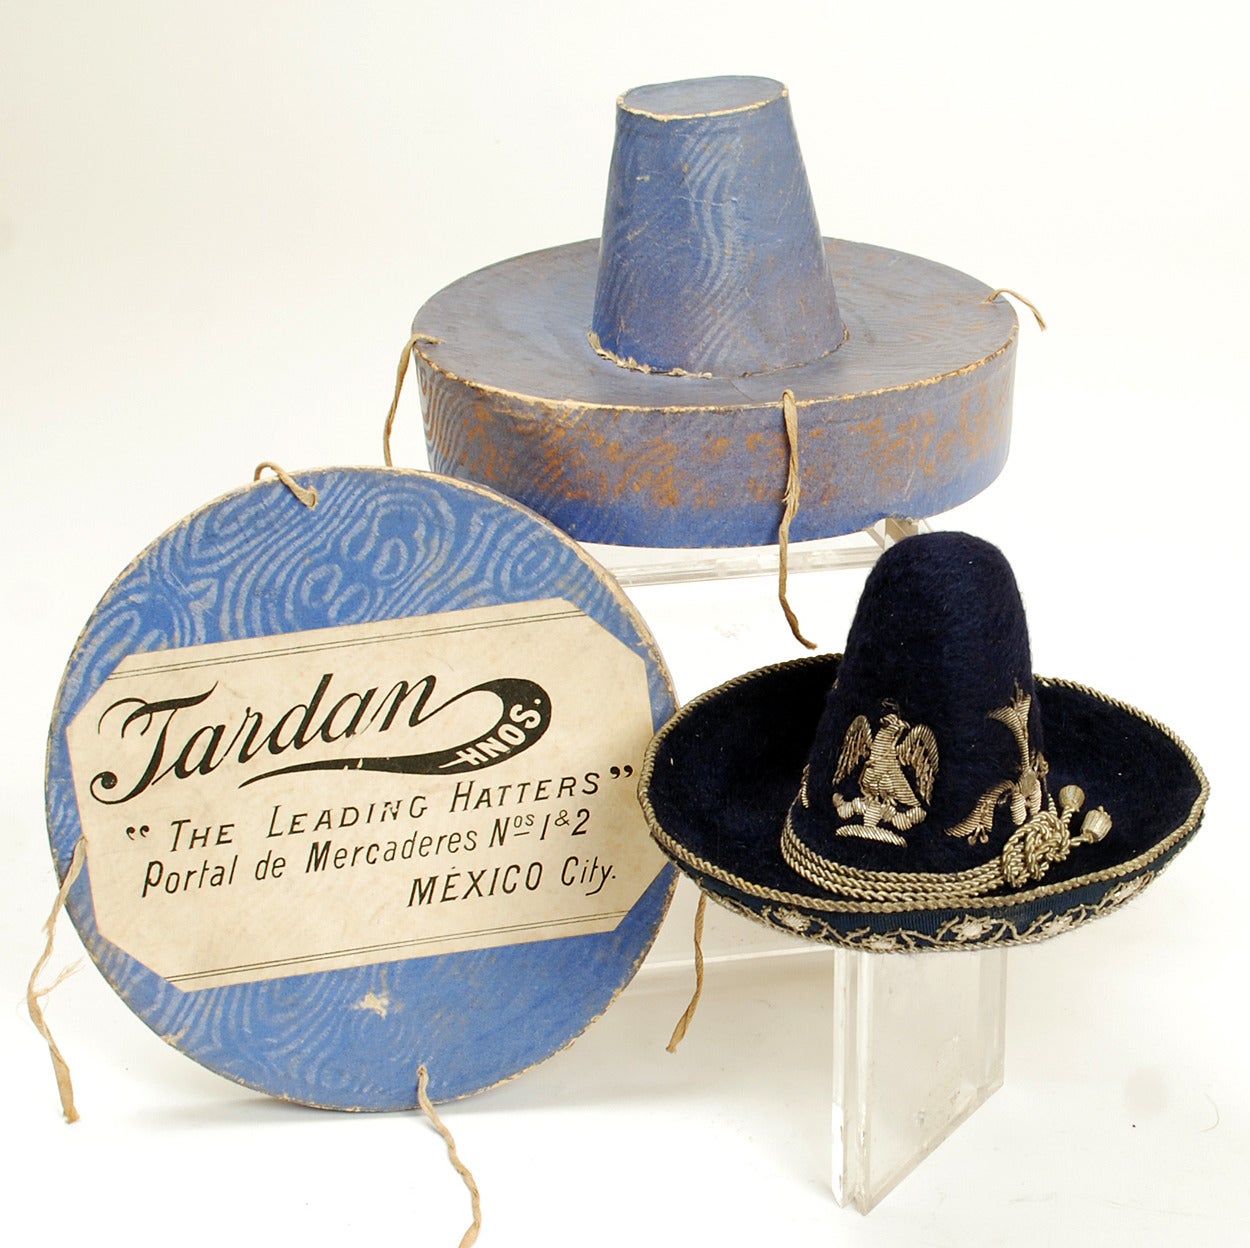 Extremely rare early 20th century handmade salesman's sample sombrero, made by the Tardan Company, the most important sombrero and hat manufacturer in Mexico. The Tardan Company, located just a few blocks from the Zocalo in Mexico City, continues